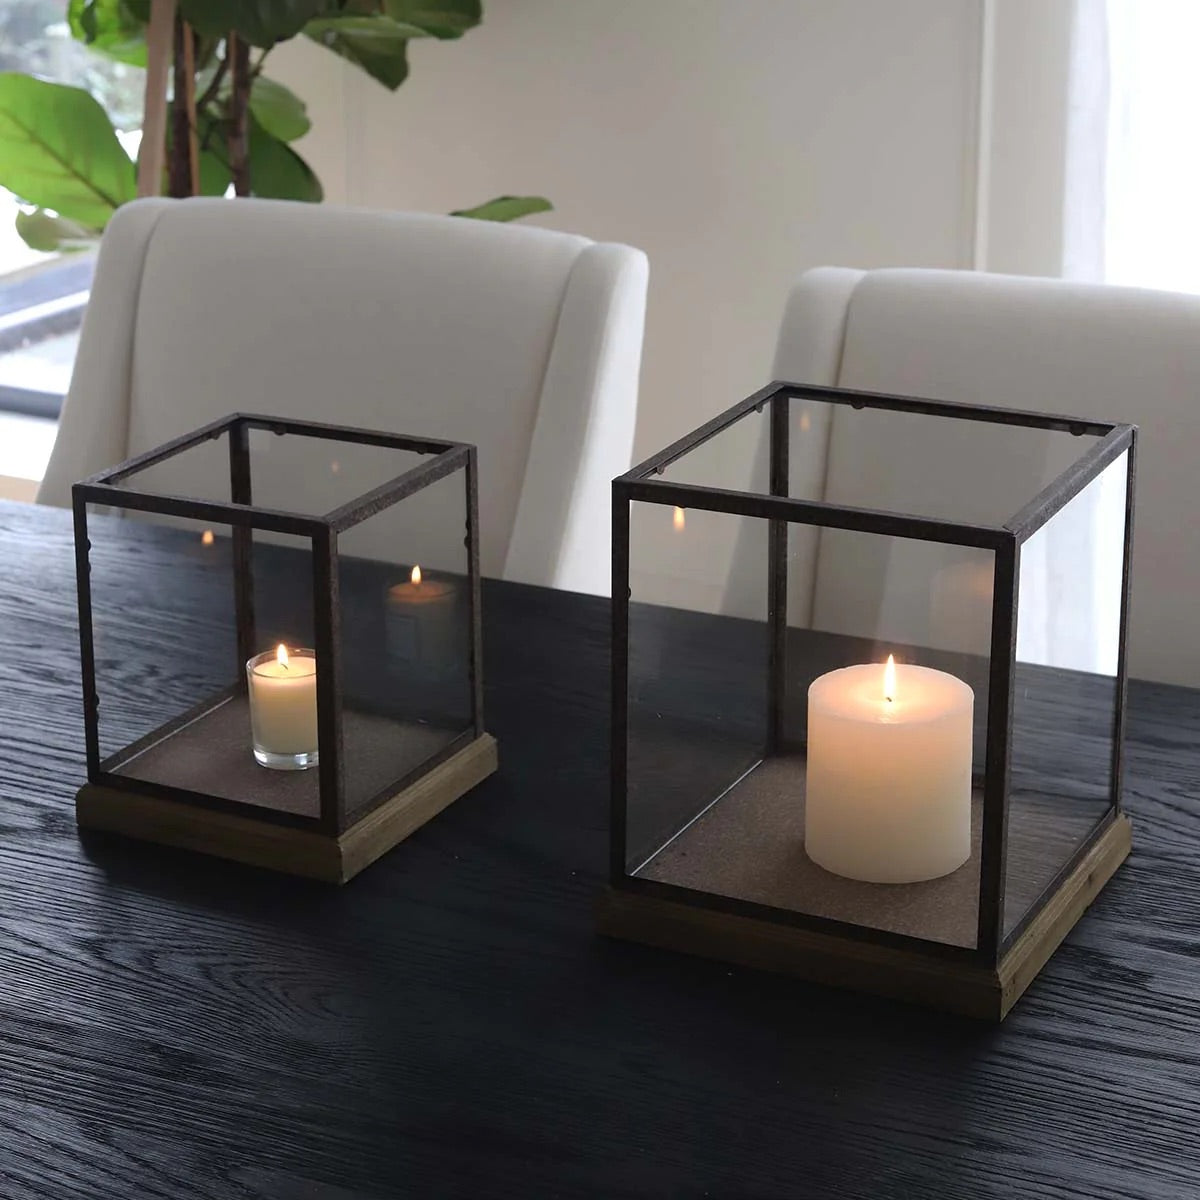 Set of Two Aged Square Candle Holders